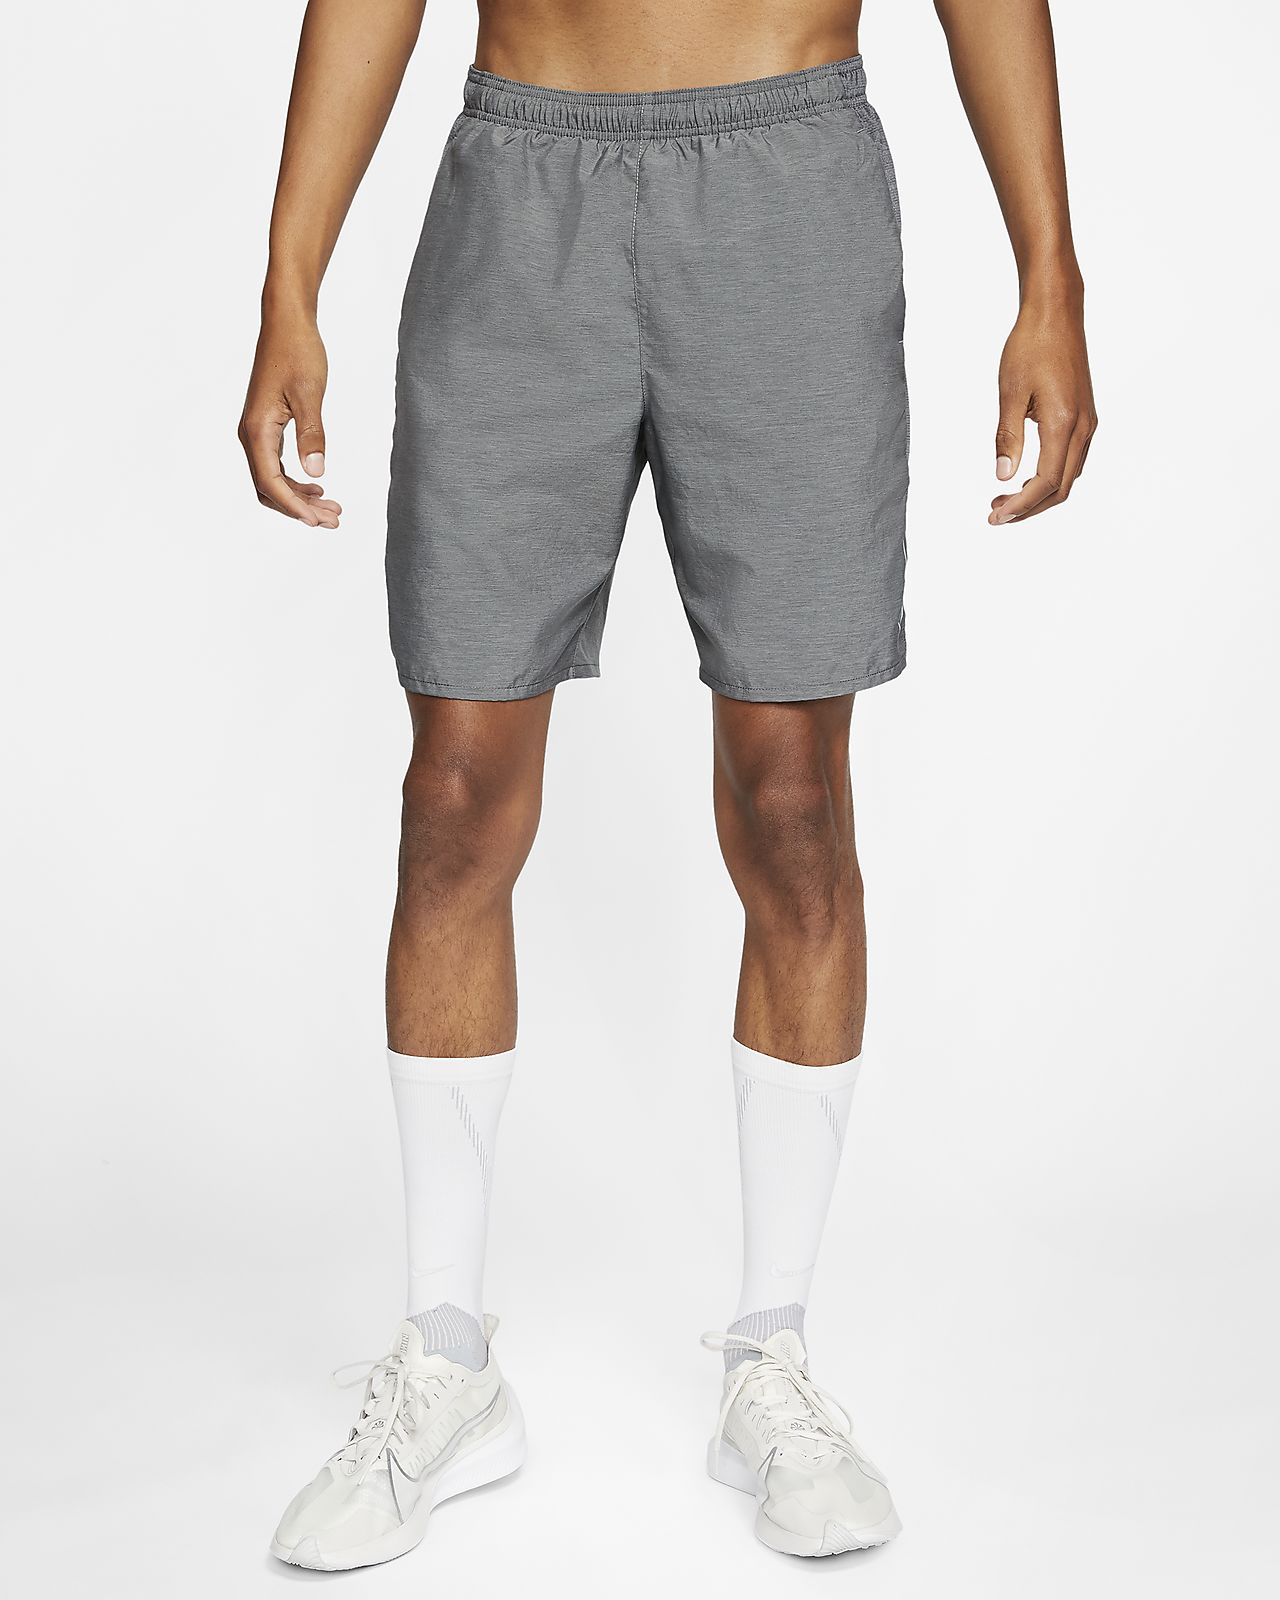 nike challenger 9 inch shorts discount 